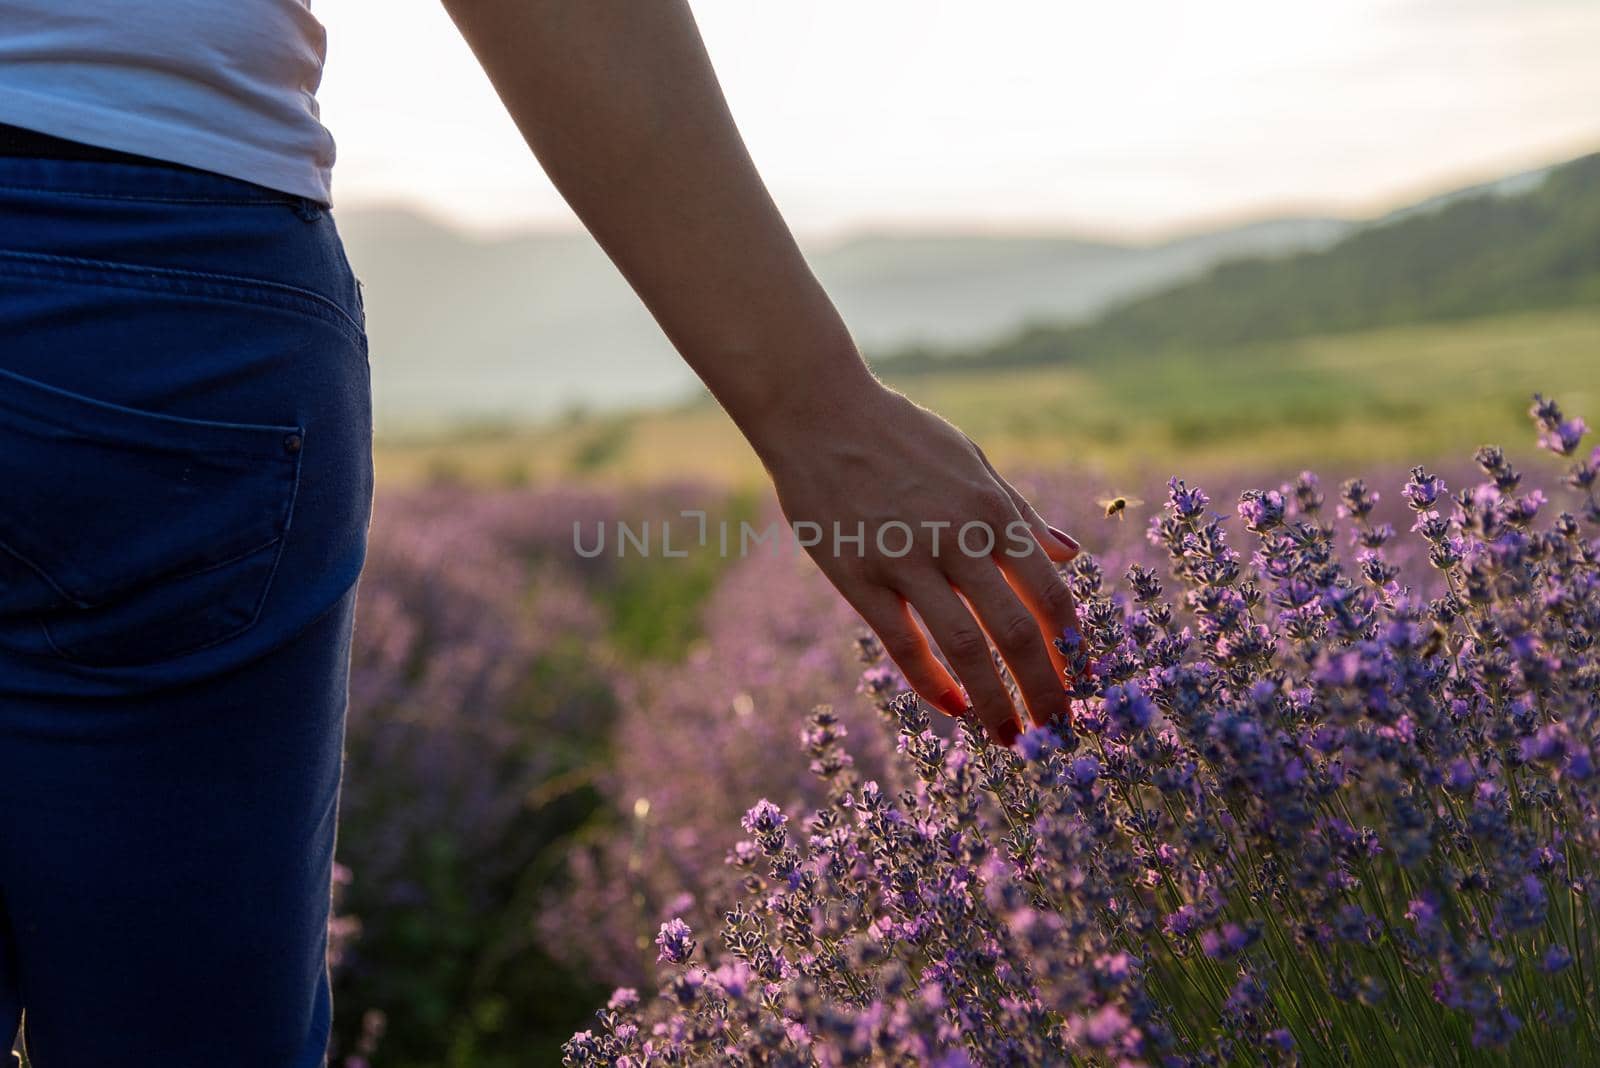 Touching the lavender at beautiful sunset